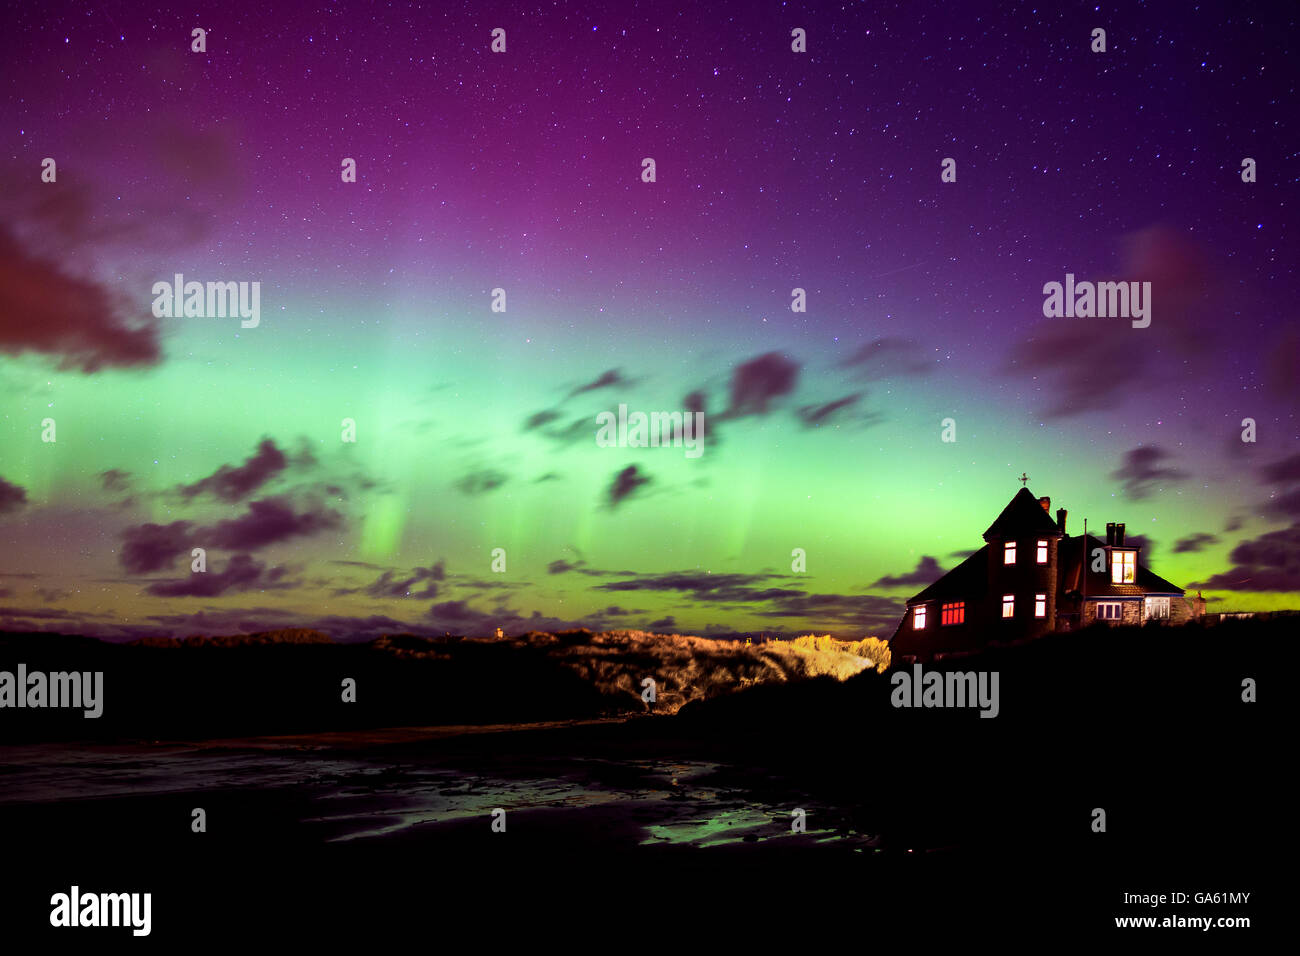 The Aurora Borealis lights up the night sky over Beadnell Bay in Northumberland Stock Photo